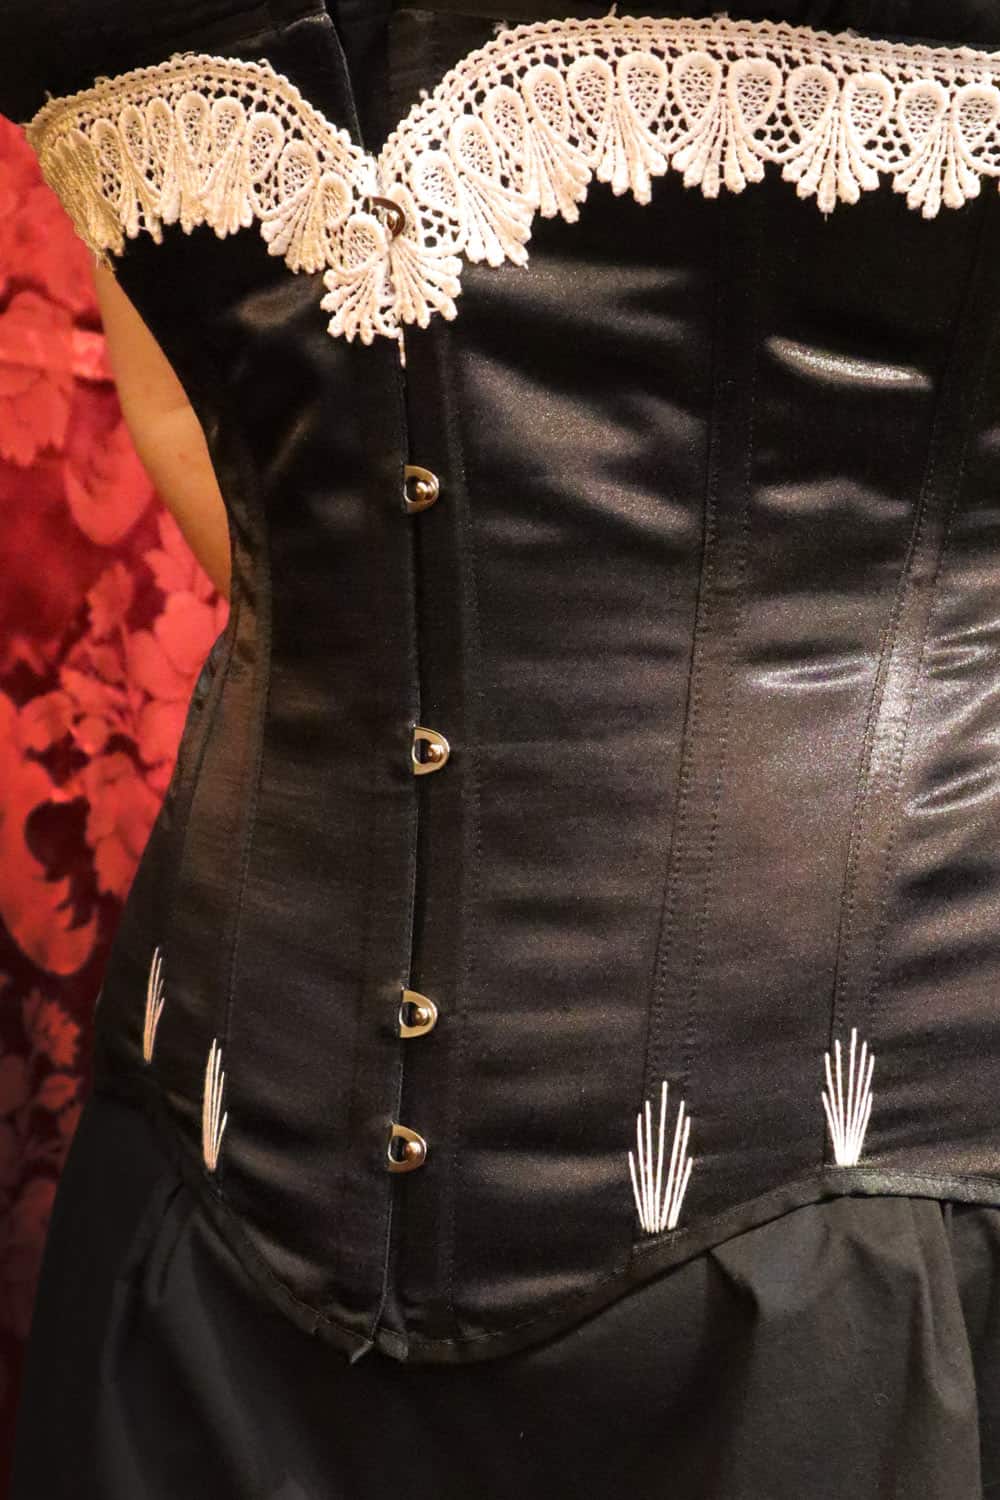 Edwardian Corset in Black Satin with Top Edge Lace Trim